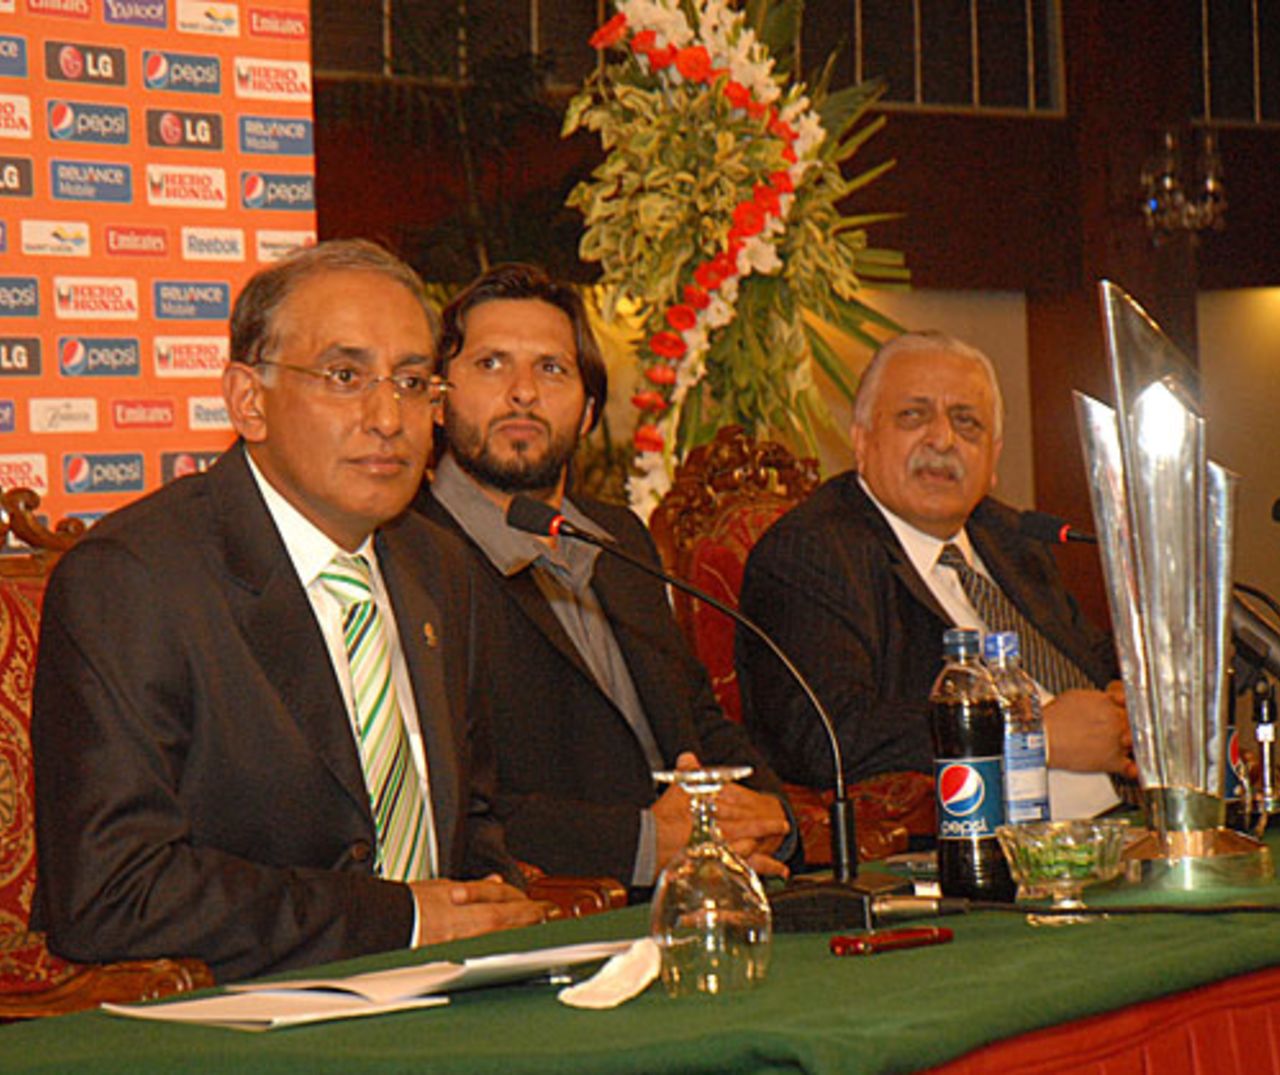 Haroon Lorgat, Shahid Afridi and Ijaz Butt address the media during the official launch of the ICC World Twenty20 in Karachi, April 15, 2010